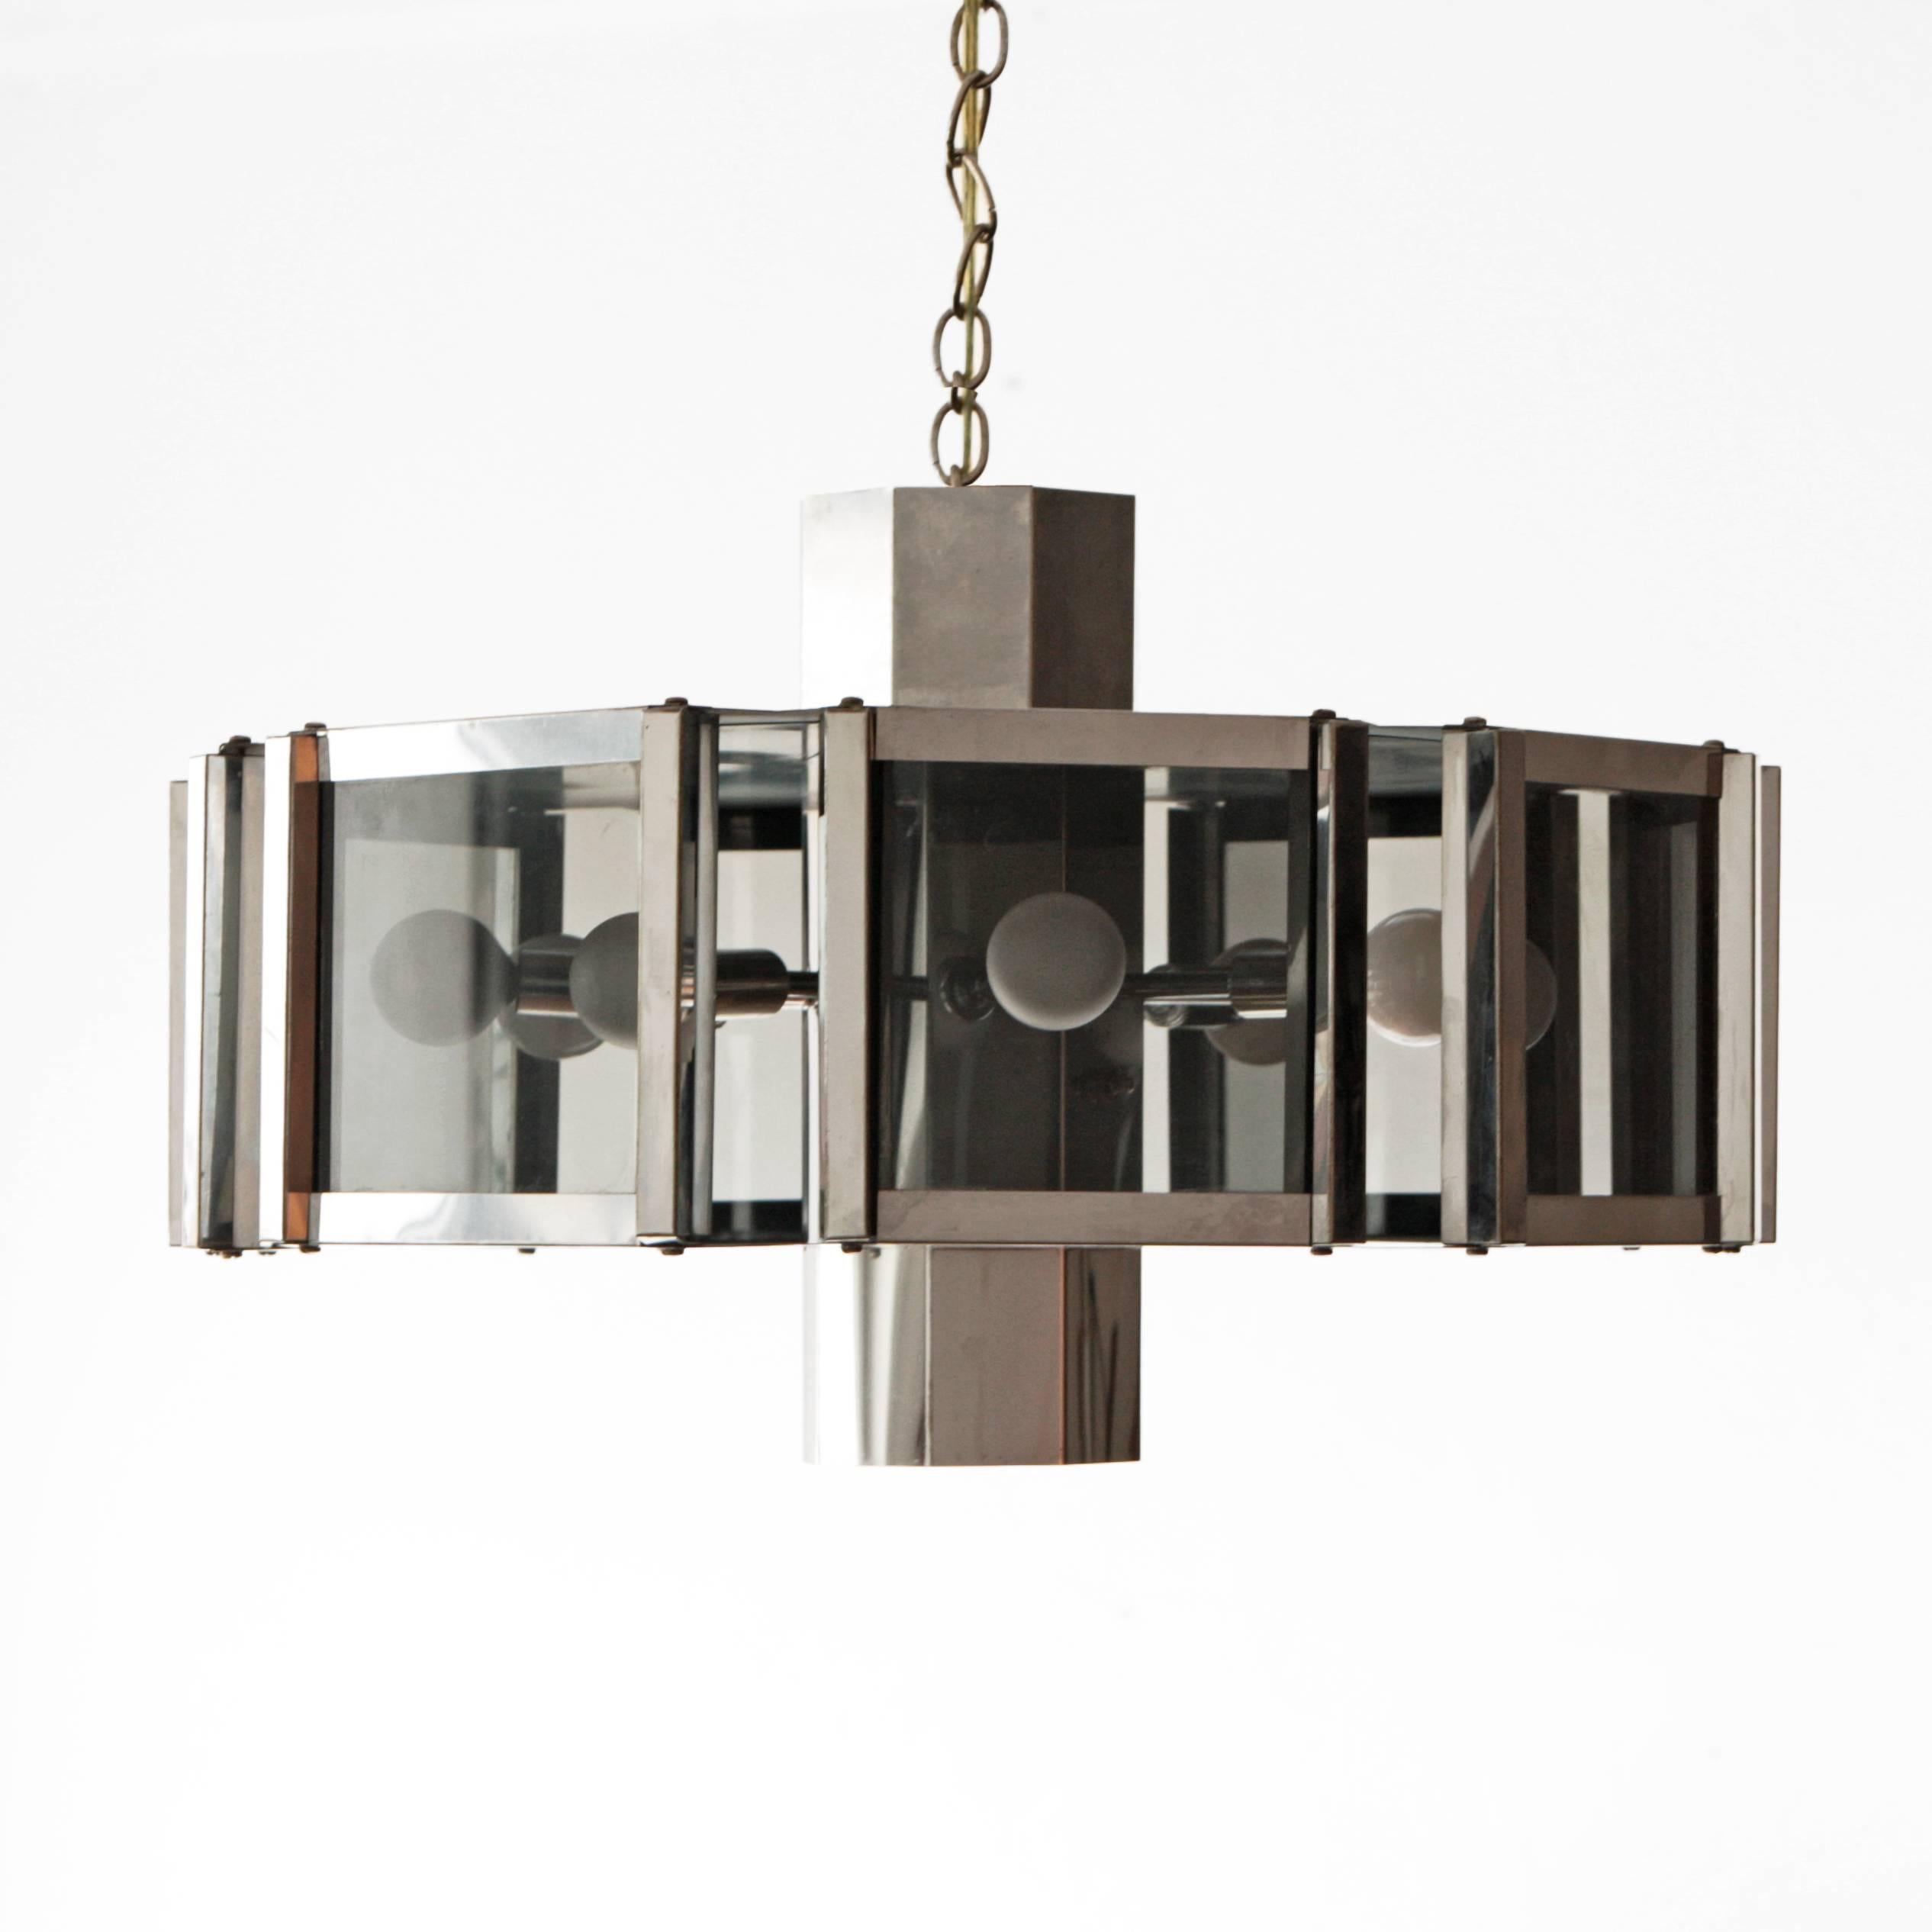 Chandelier designed by Robert Sonneman. Chrome with smoked glass panels takes nine lightbulbs and looks great on a dimmer.